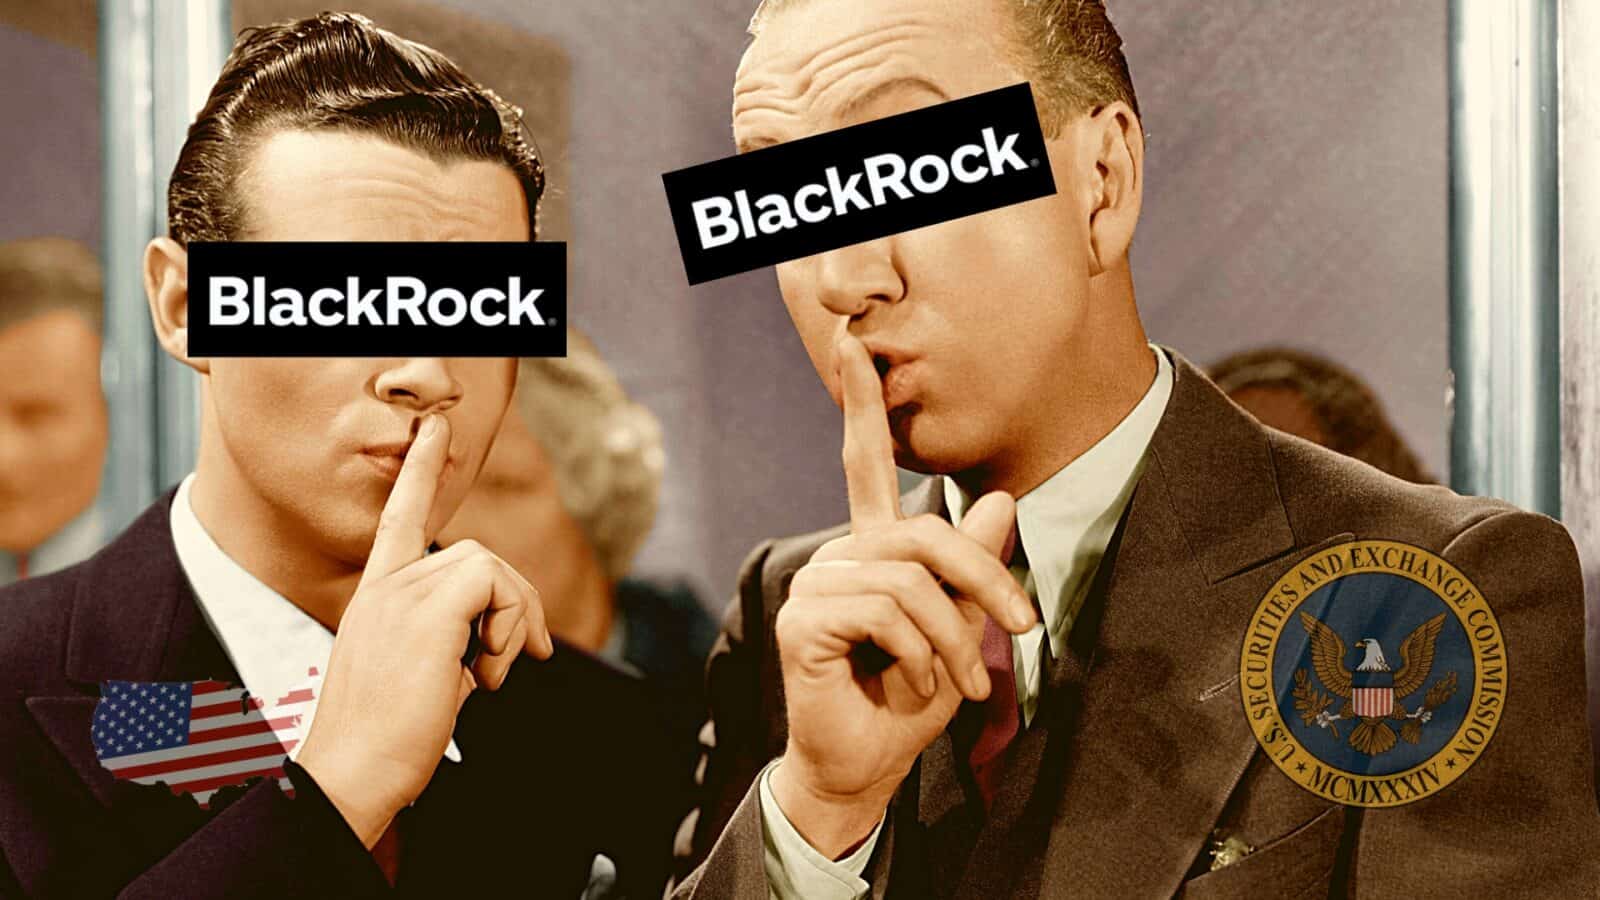 BlackRock's Crypto Endeavors Hang in the Balance Amid SEC Investigation